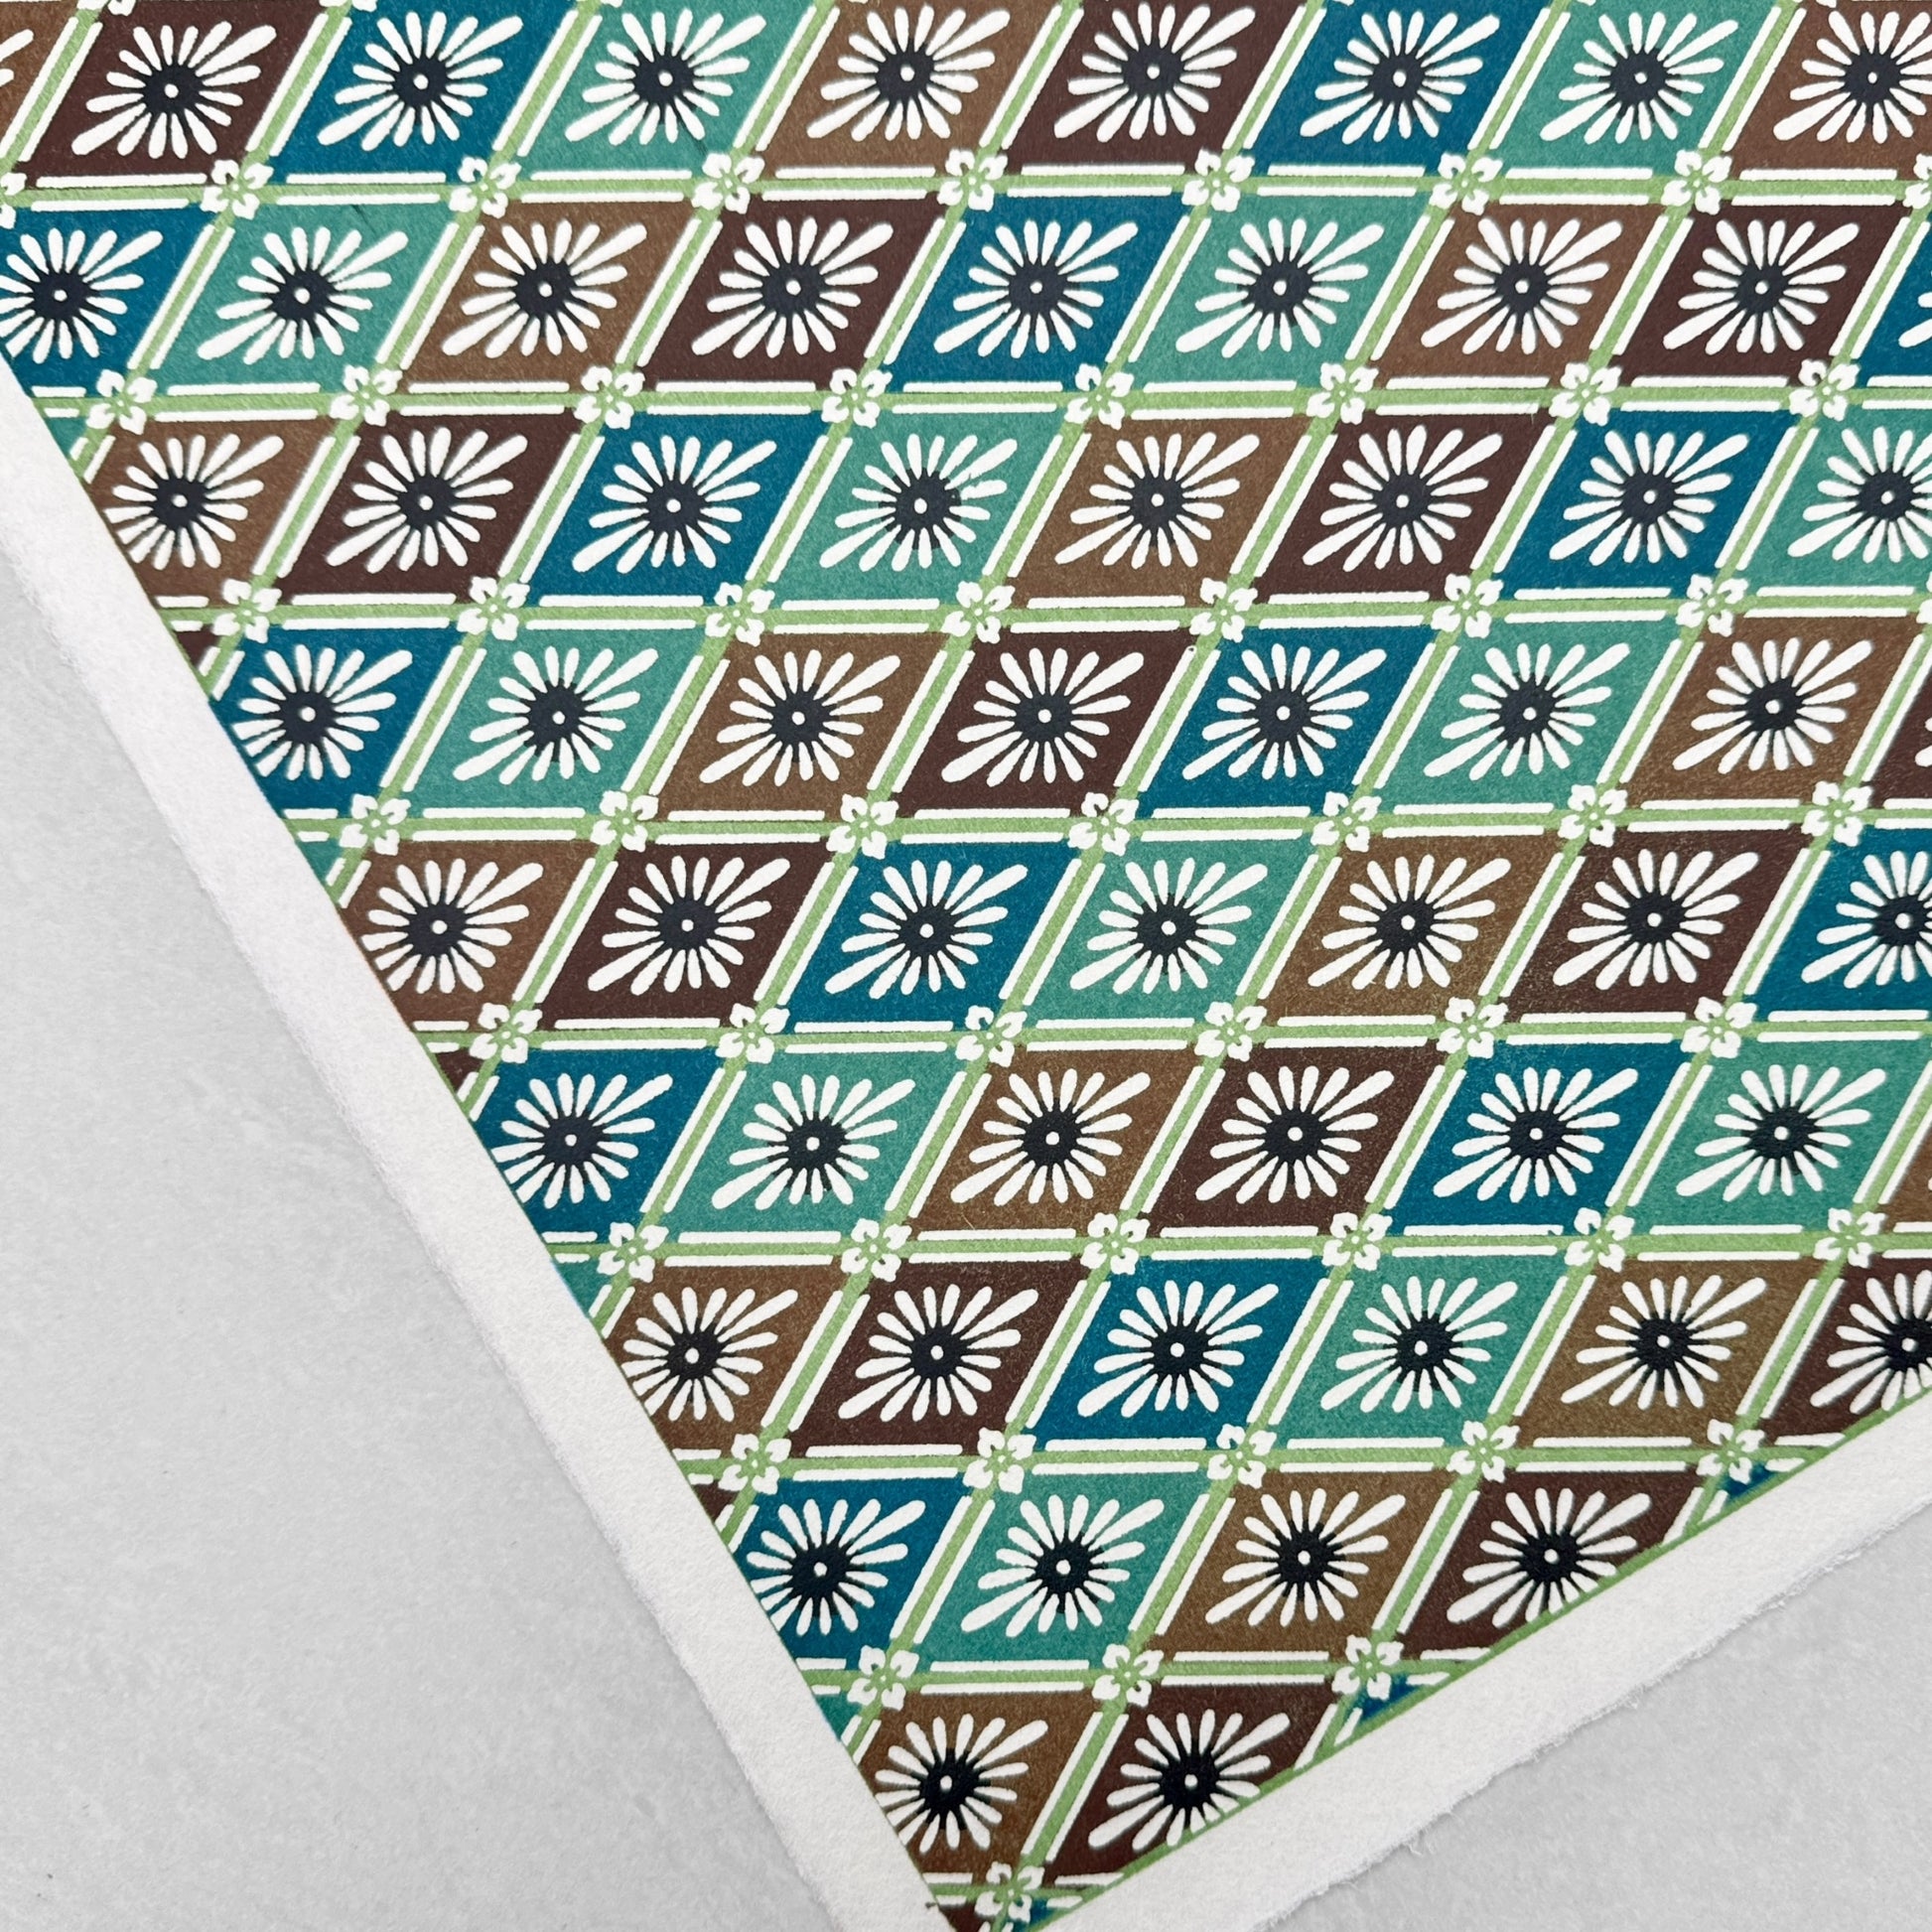 A Japanese stencil-dyed patterned paper with a repeat pattern of floral diamonds in tones of blue, aqua, brown and white. Close-up, flat view